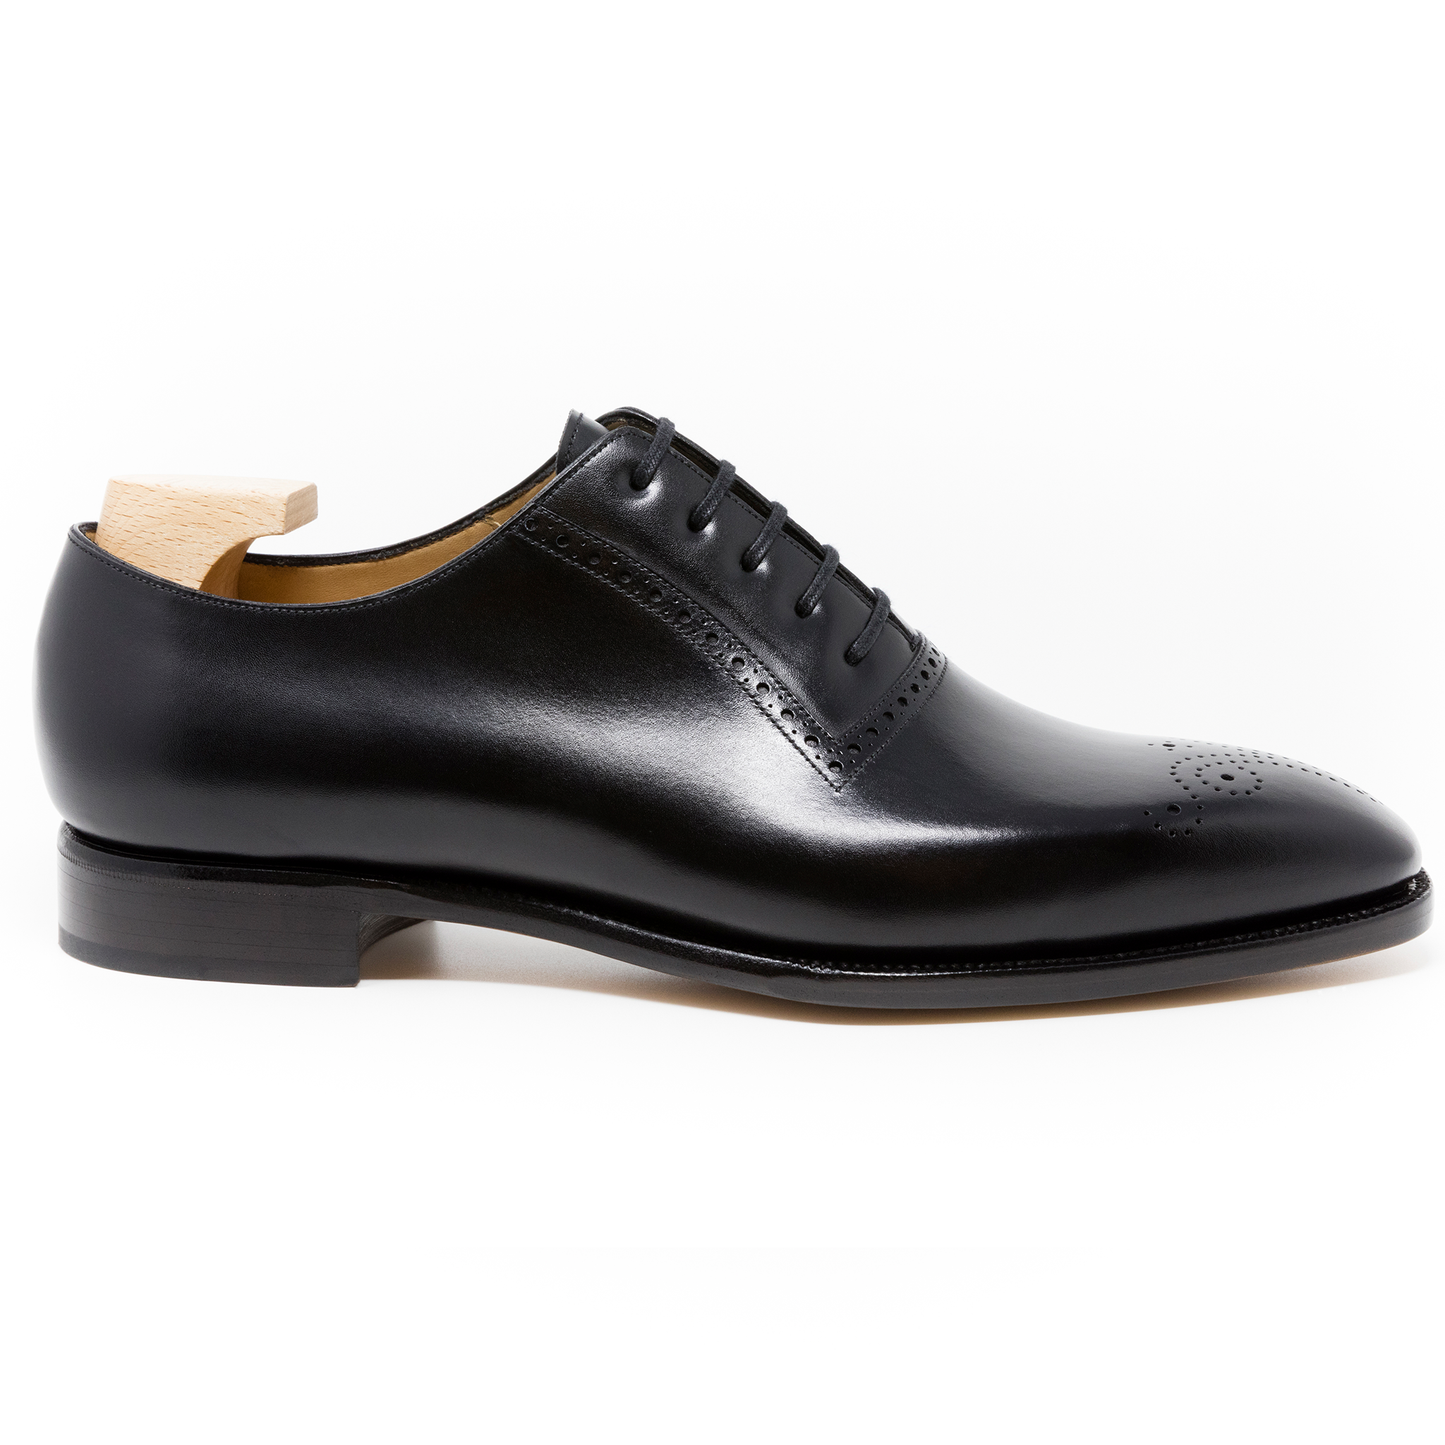 TLB Mallorca leather shoes 107 / PICASSO / BOXCALF BLACK